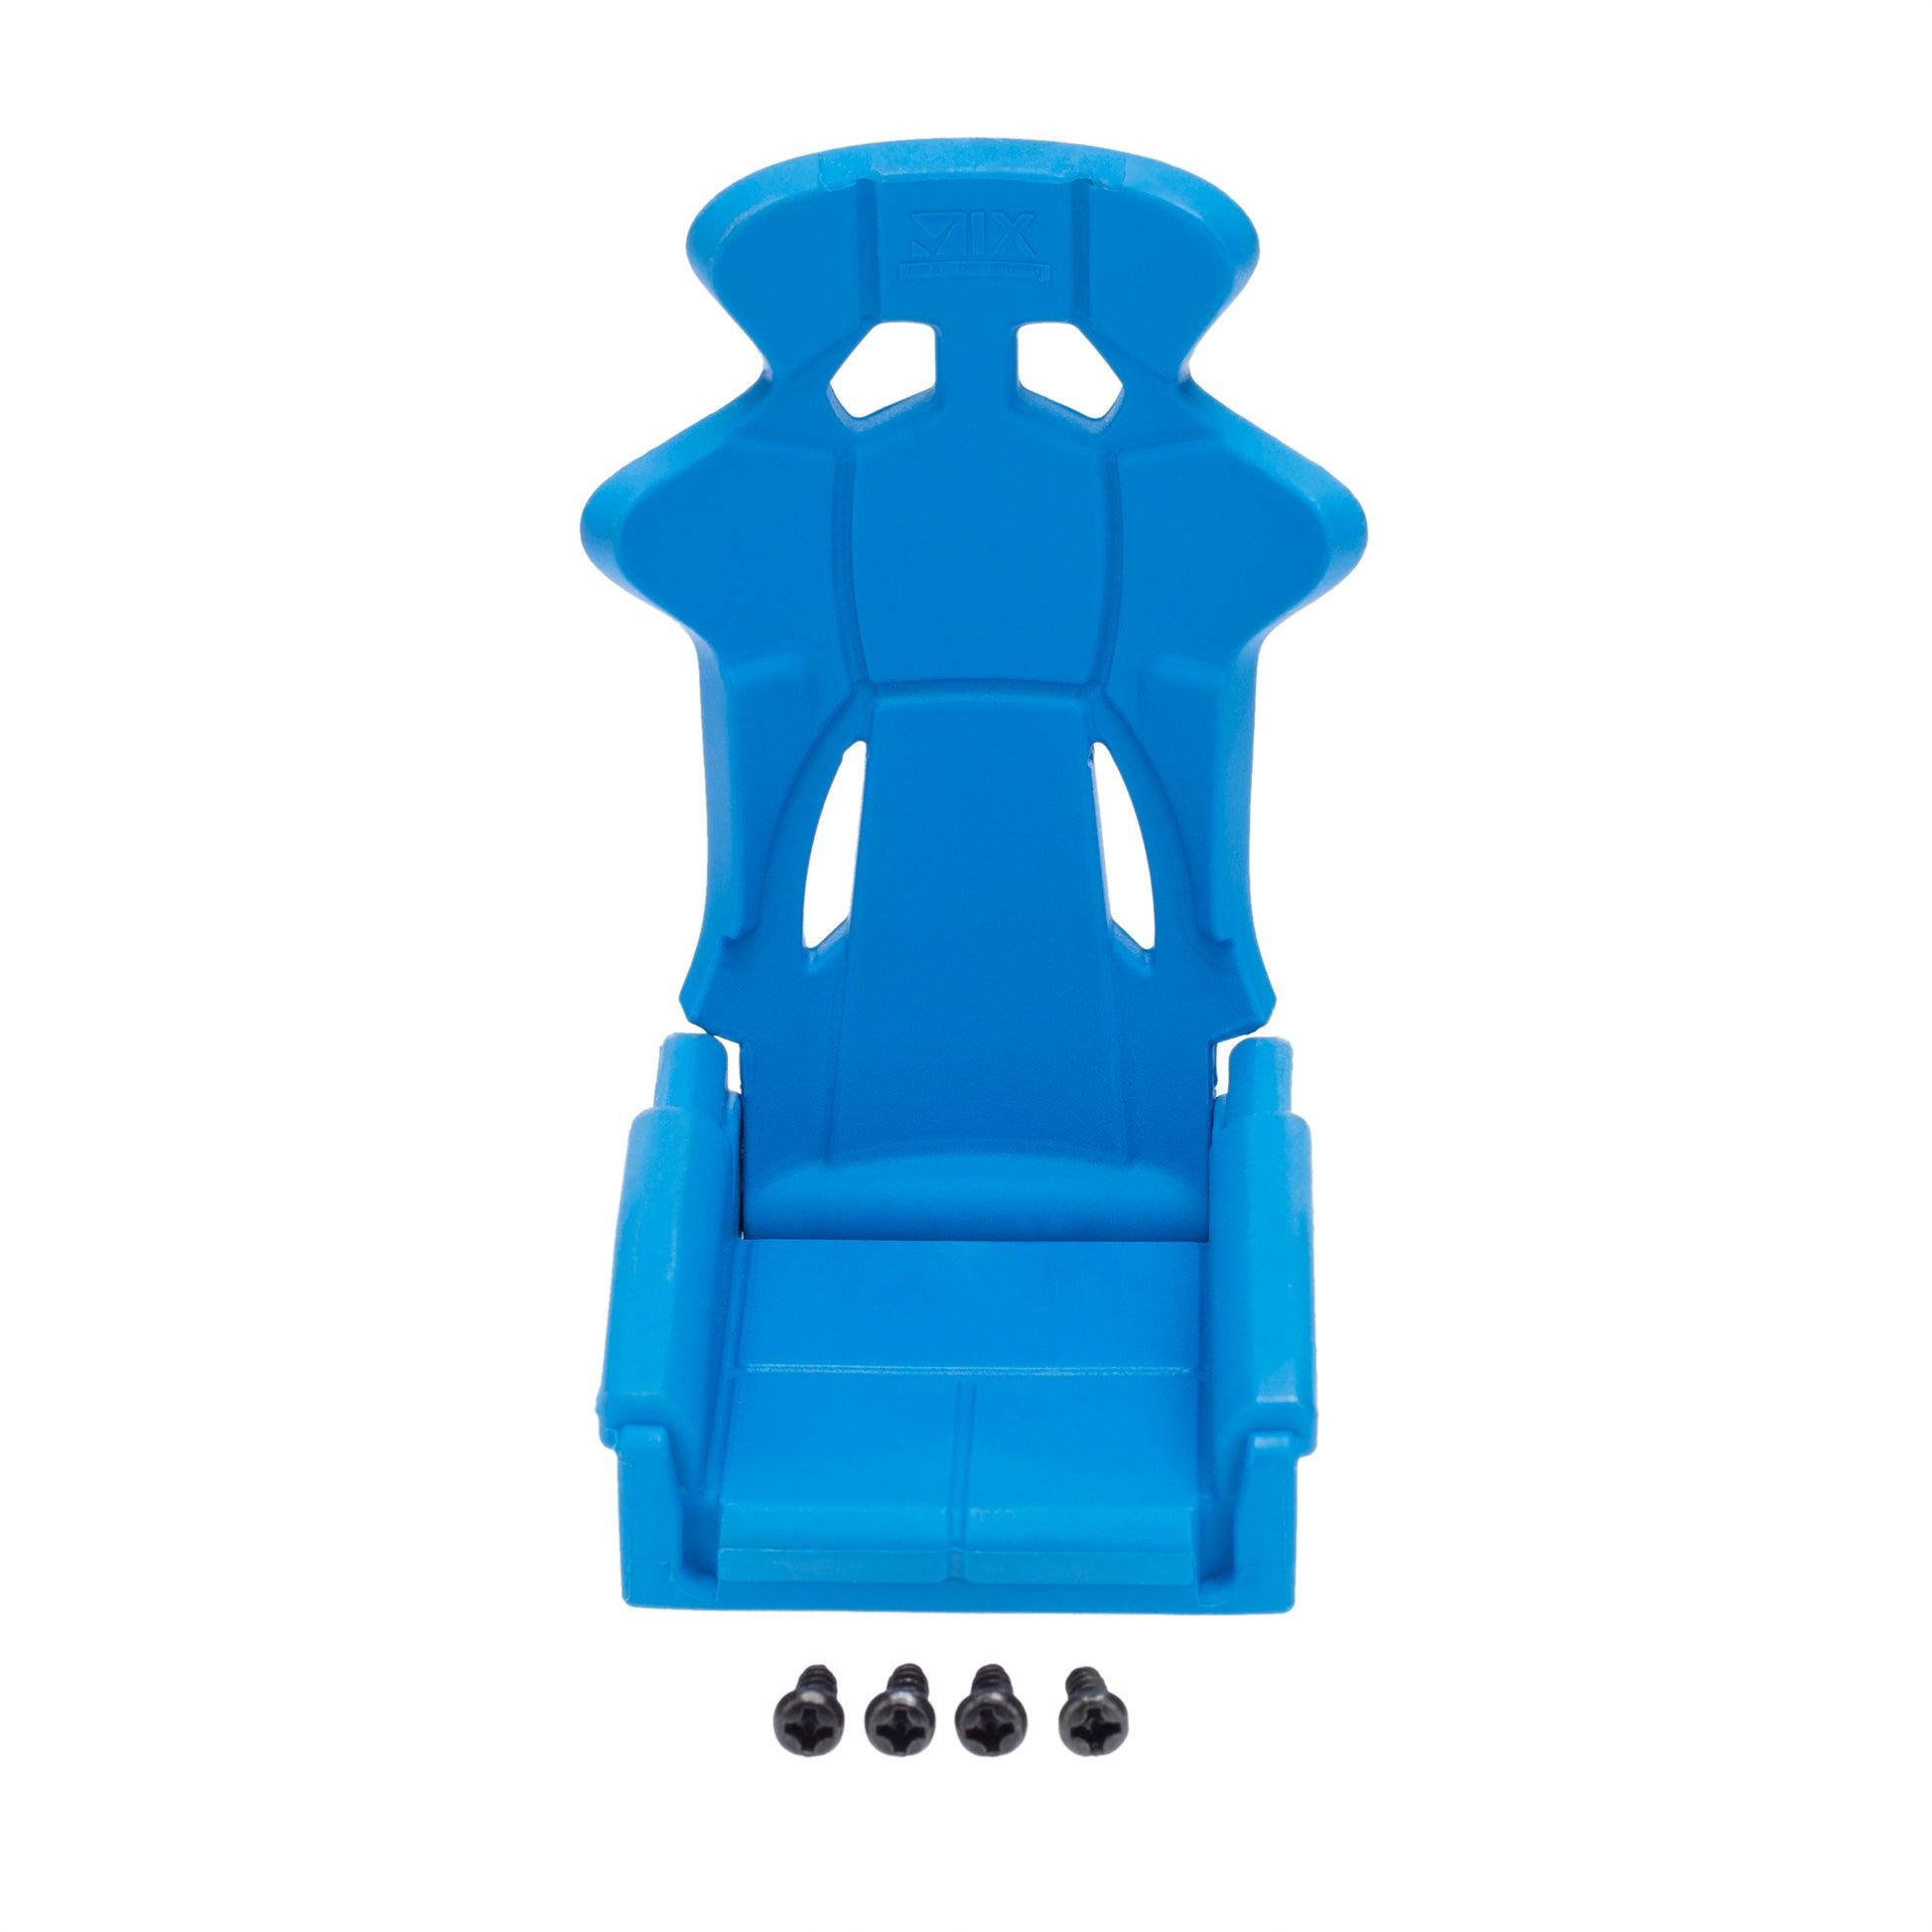 Blue Simulation Driving Seat for SCX10, TRX-4-4